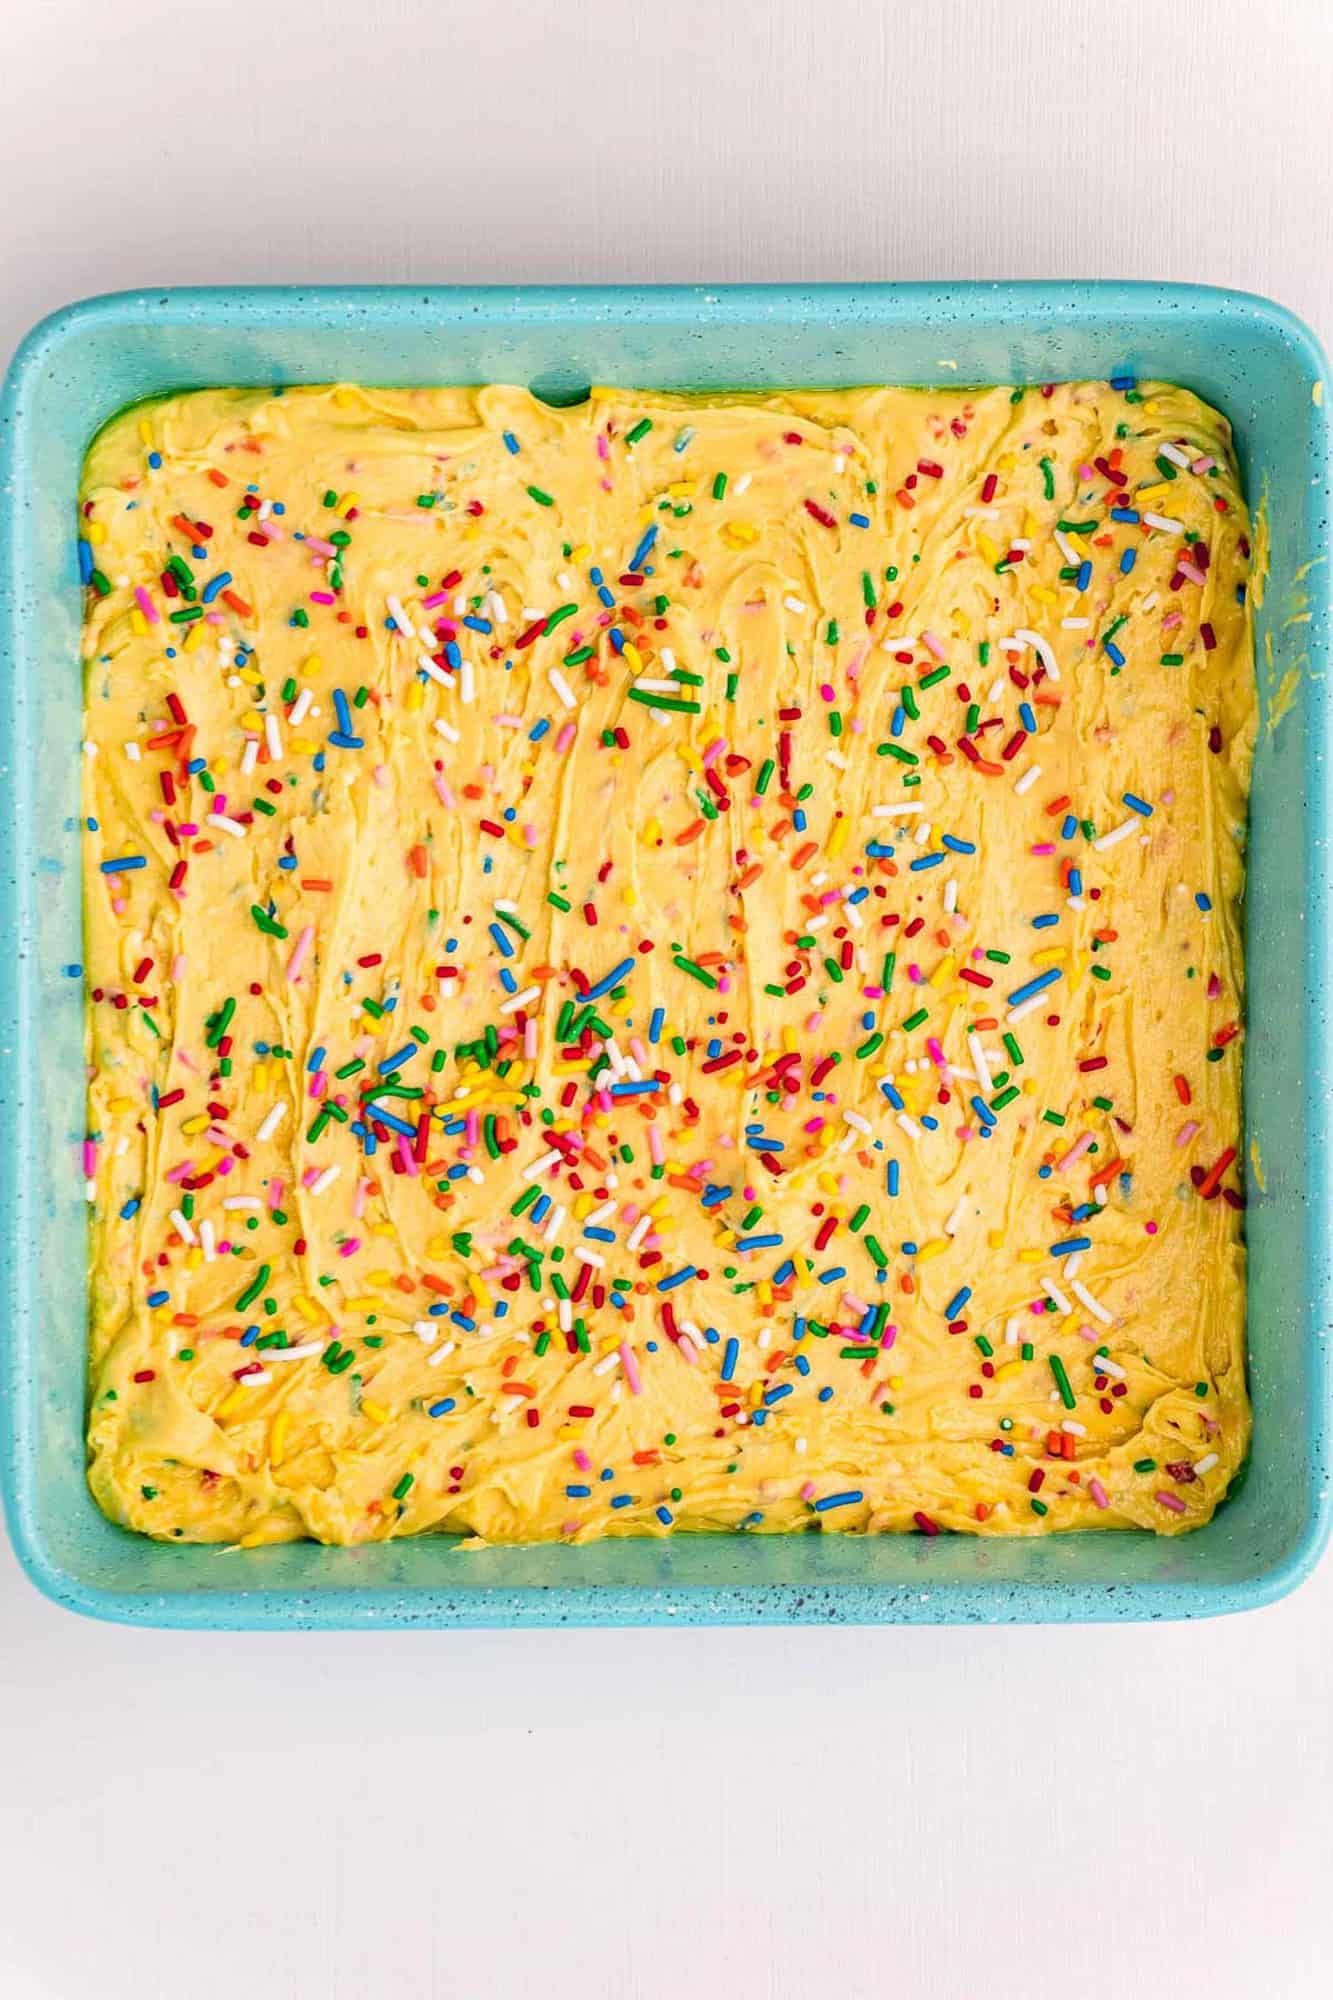 Unbaked blondies in a bright blue square baking dish.